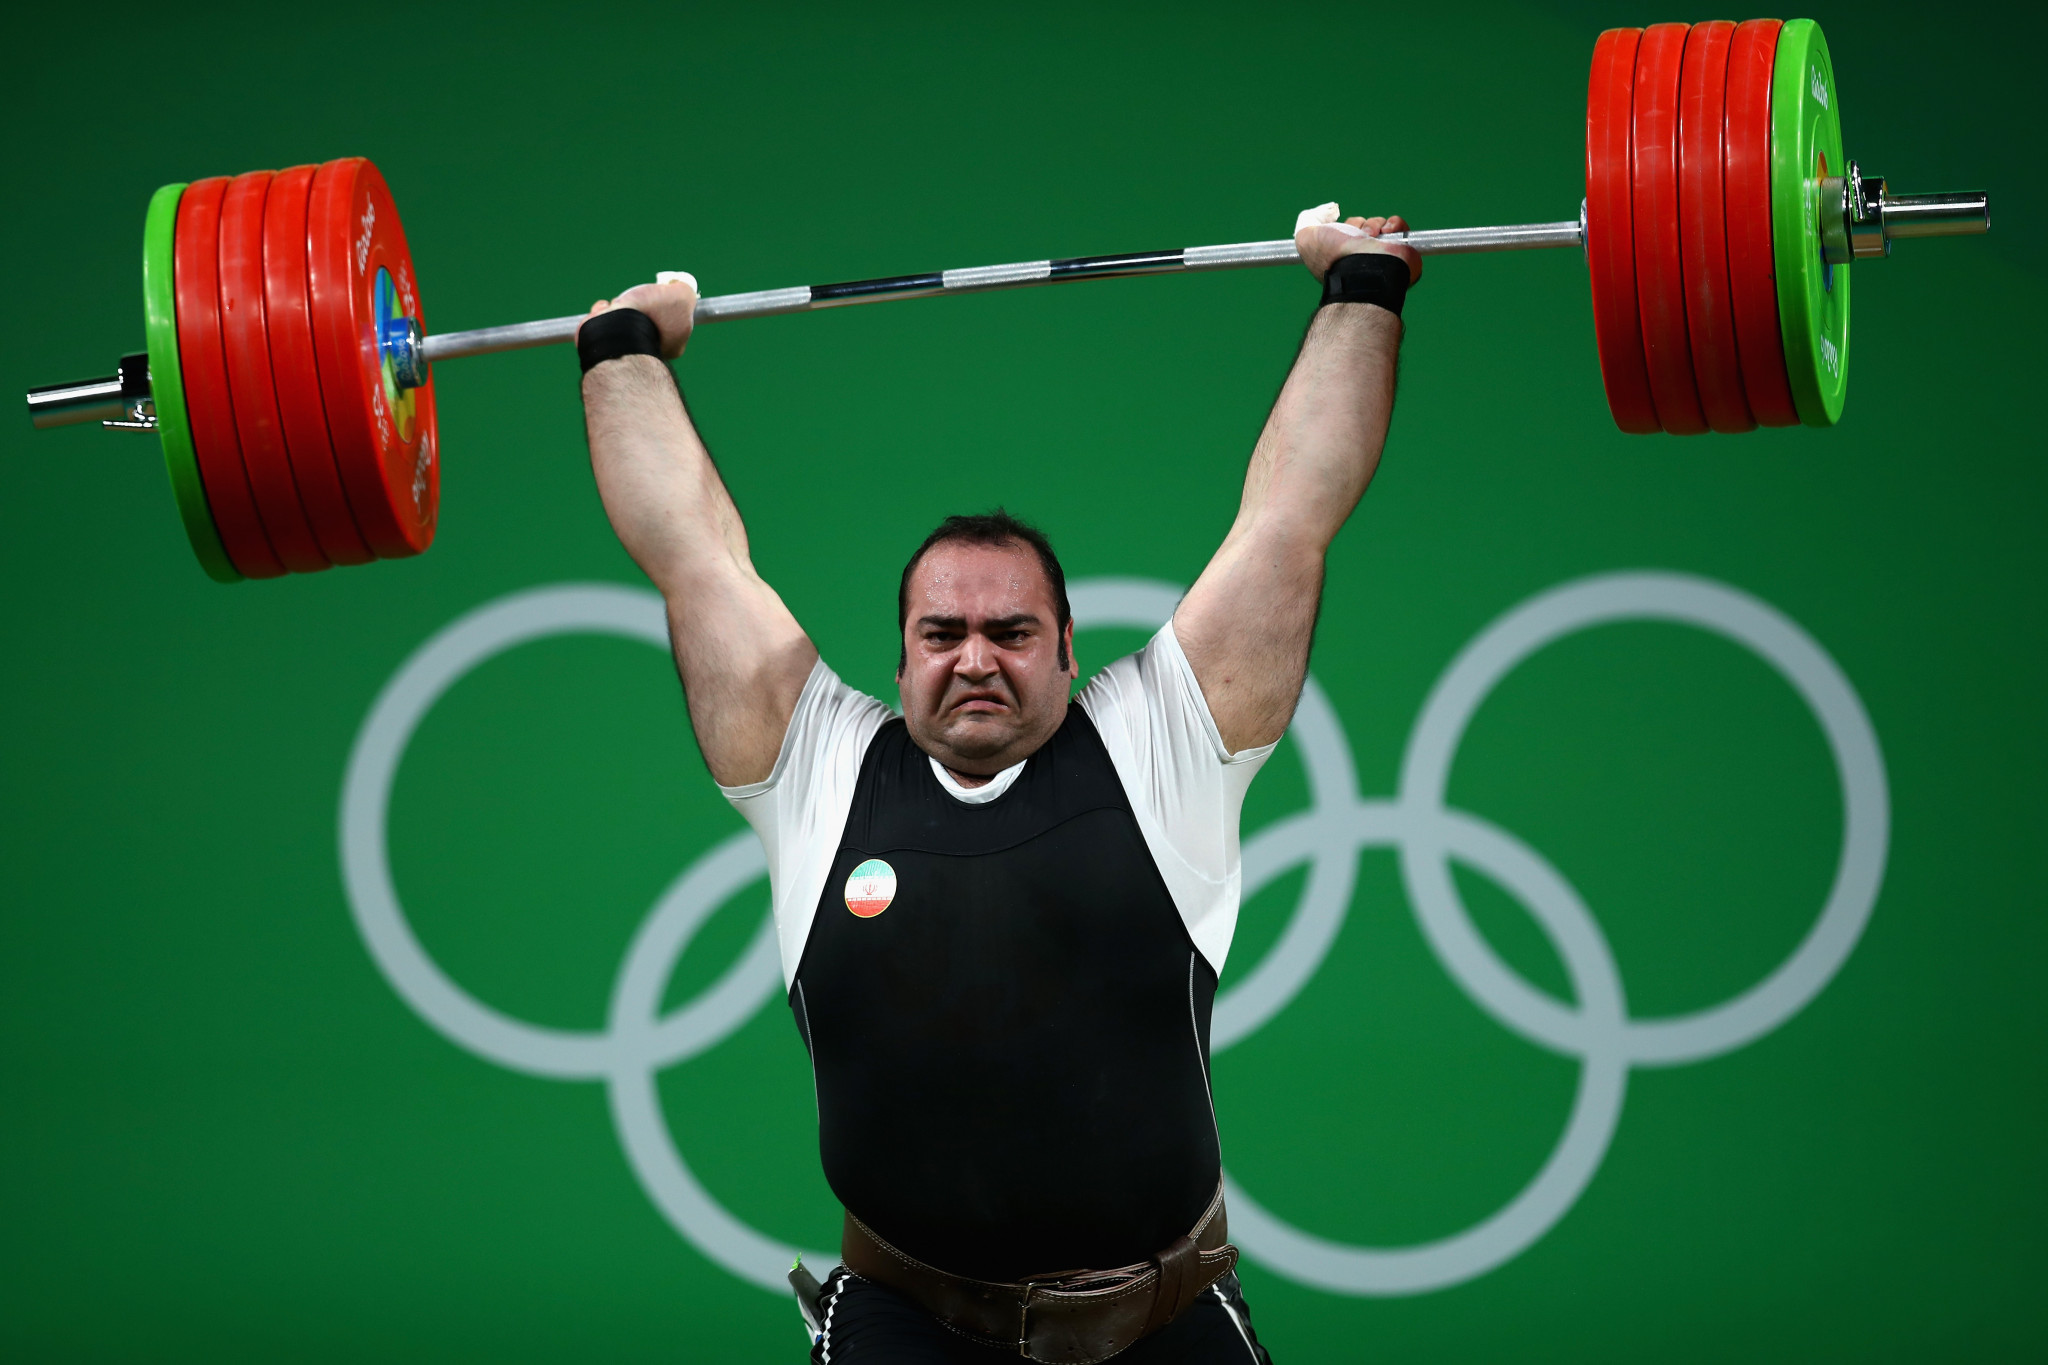 Weightlifting has been one of Iran's most successful Olympic sports ©Getty Images